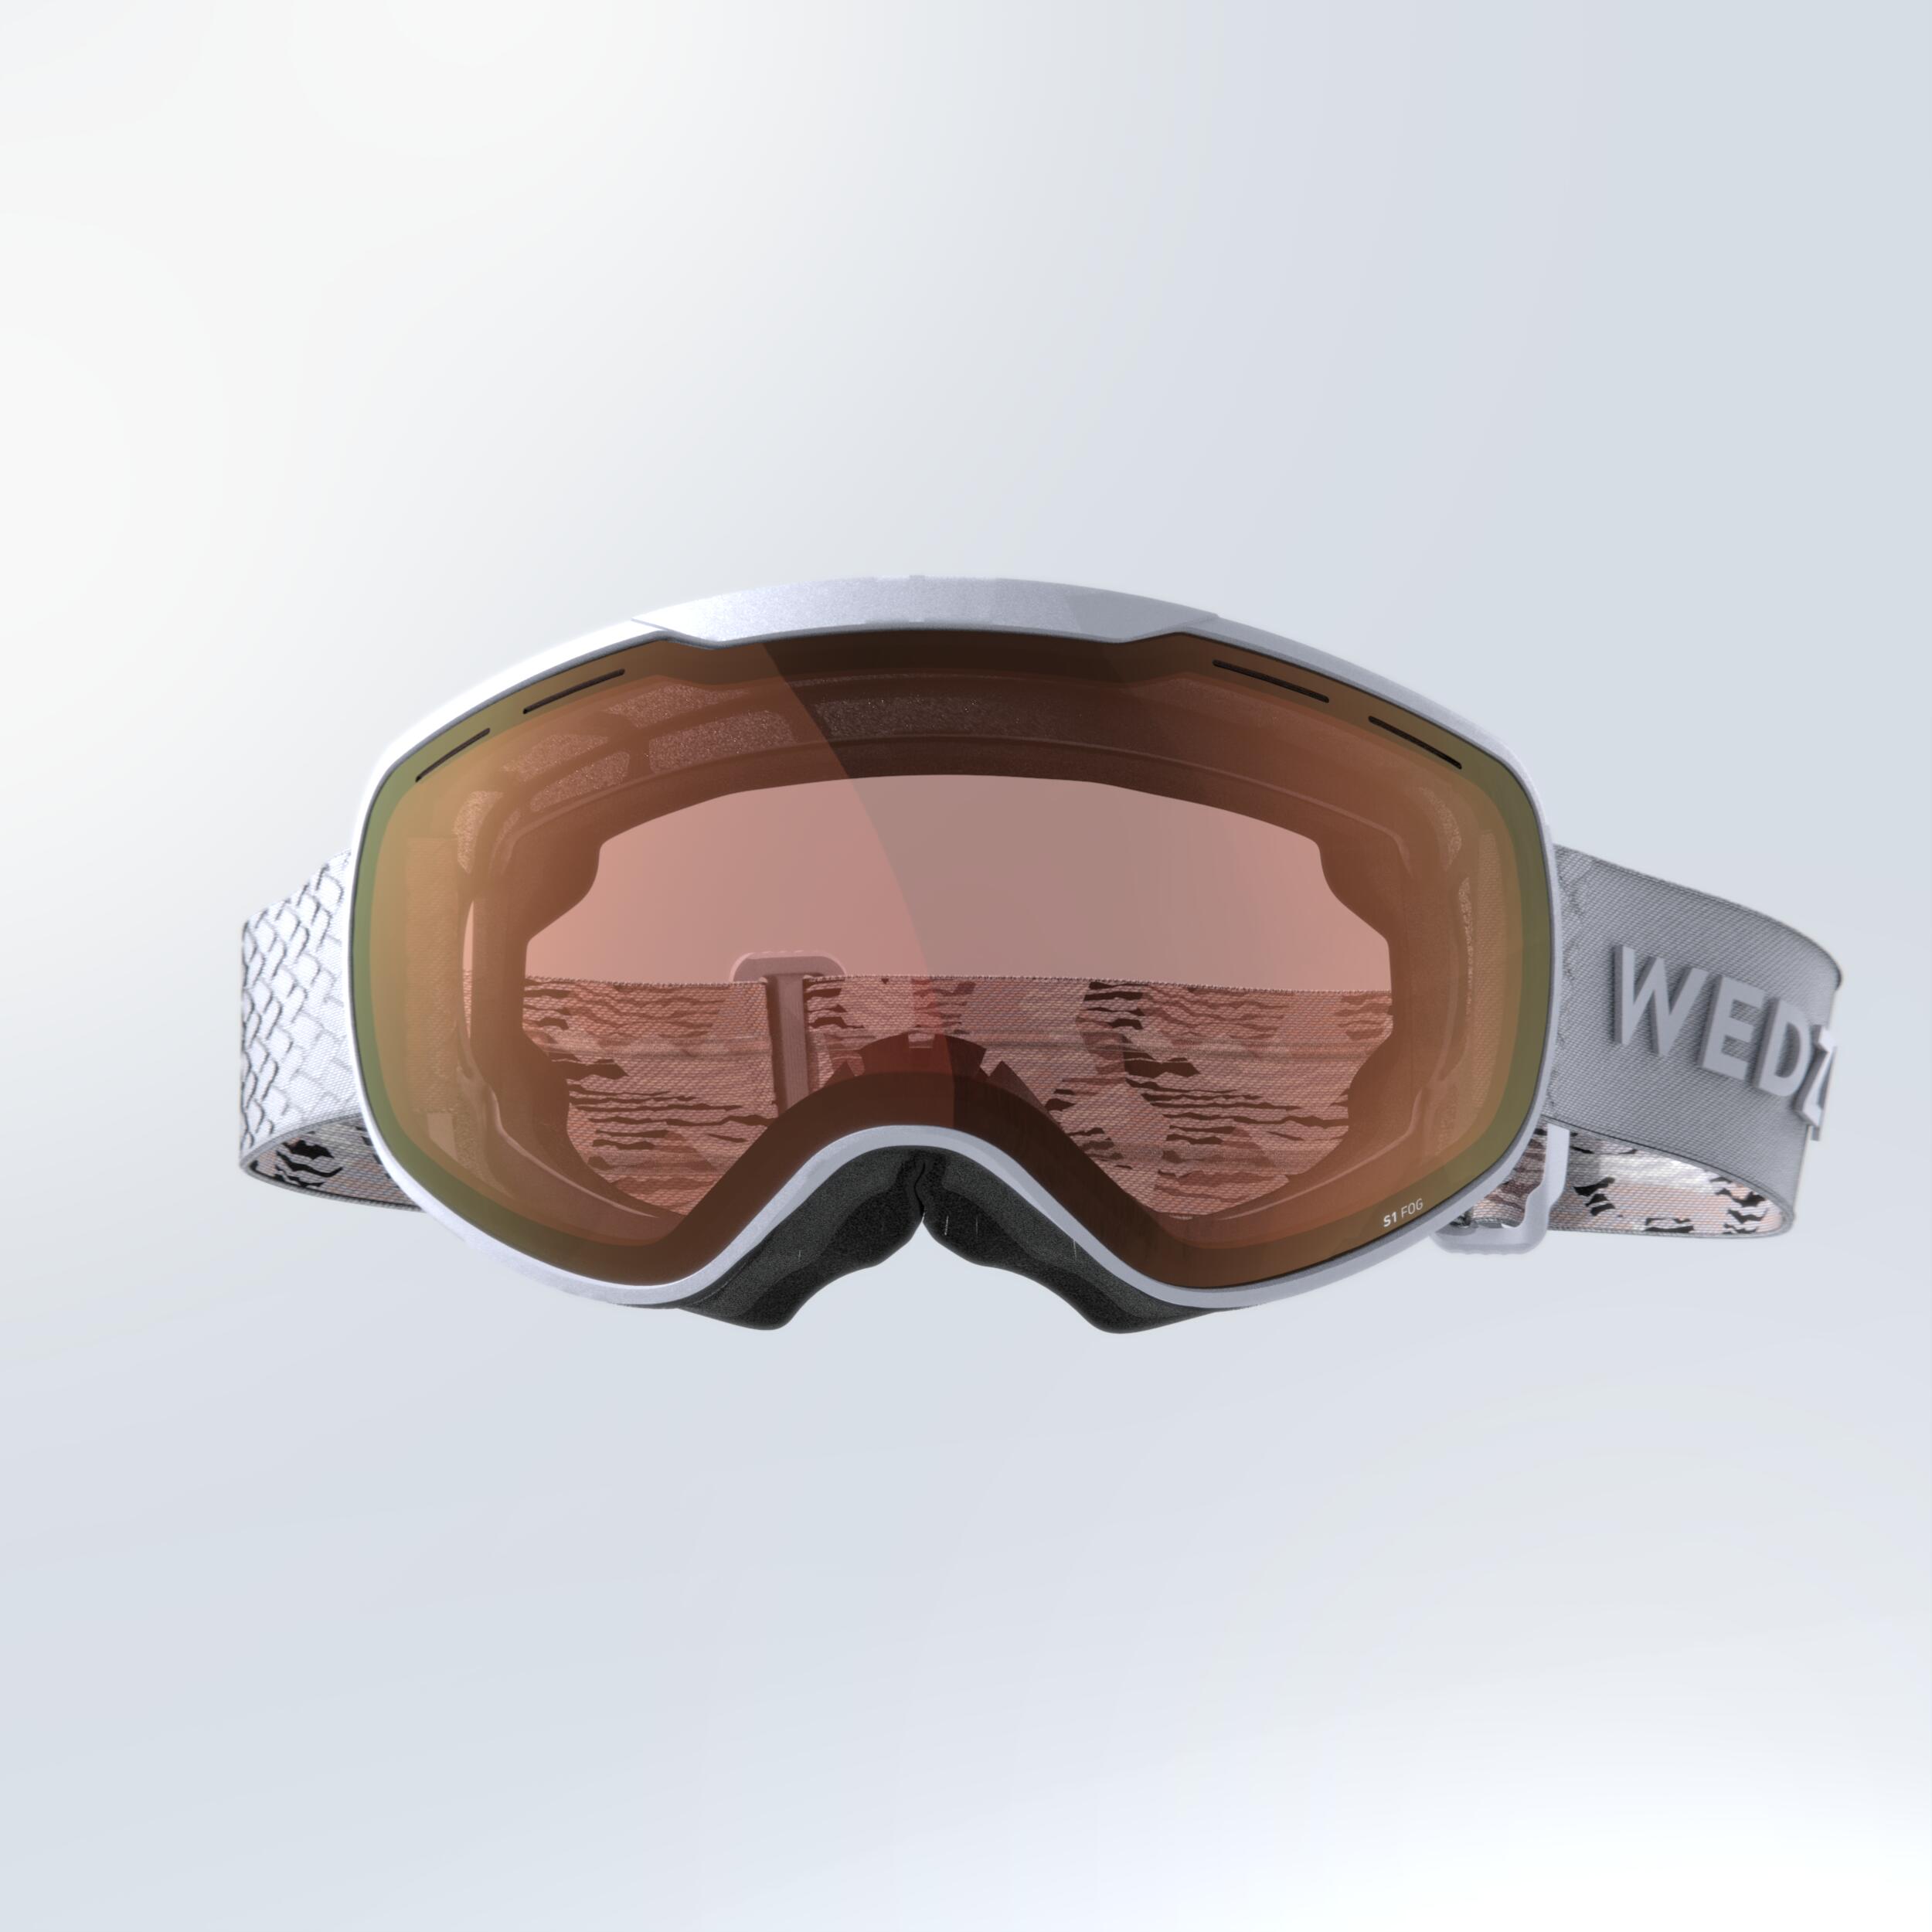 KIDS’ AND ADULTS’ BAD WEATHER SKIING GOGGLES - G 900 S1 - LIGHT PURPLE 2/5